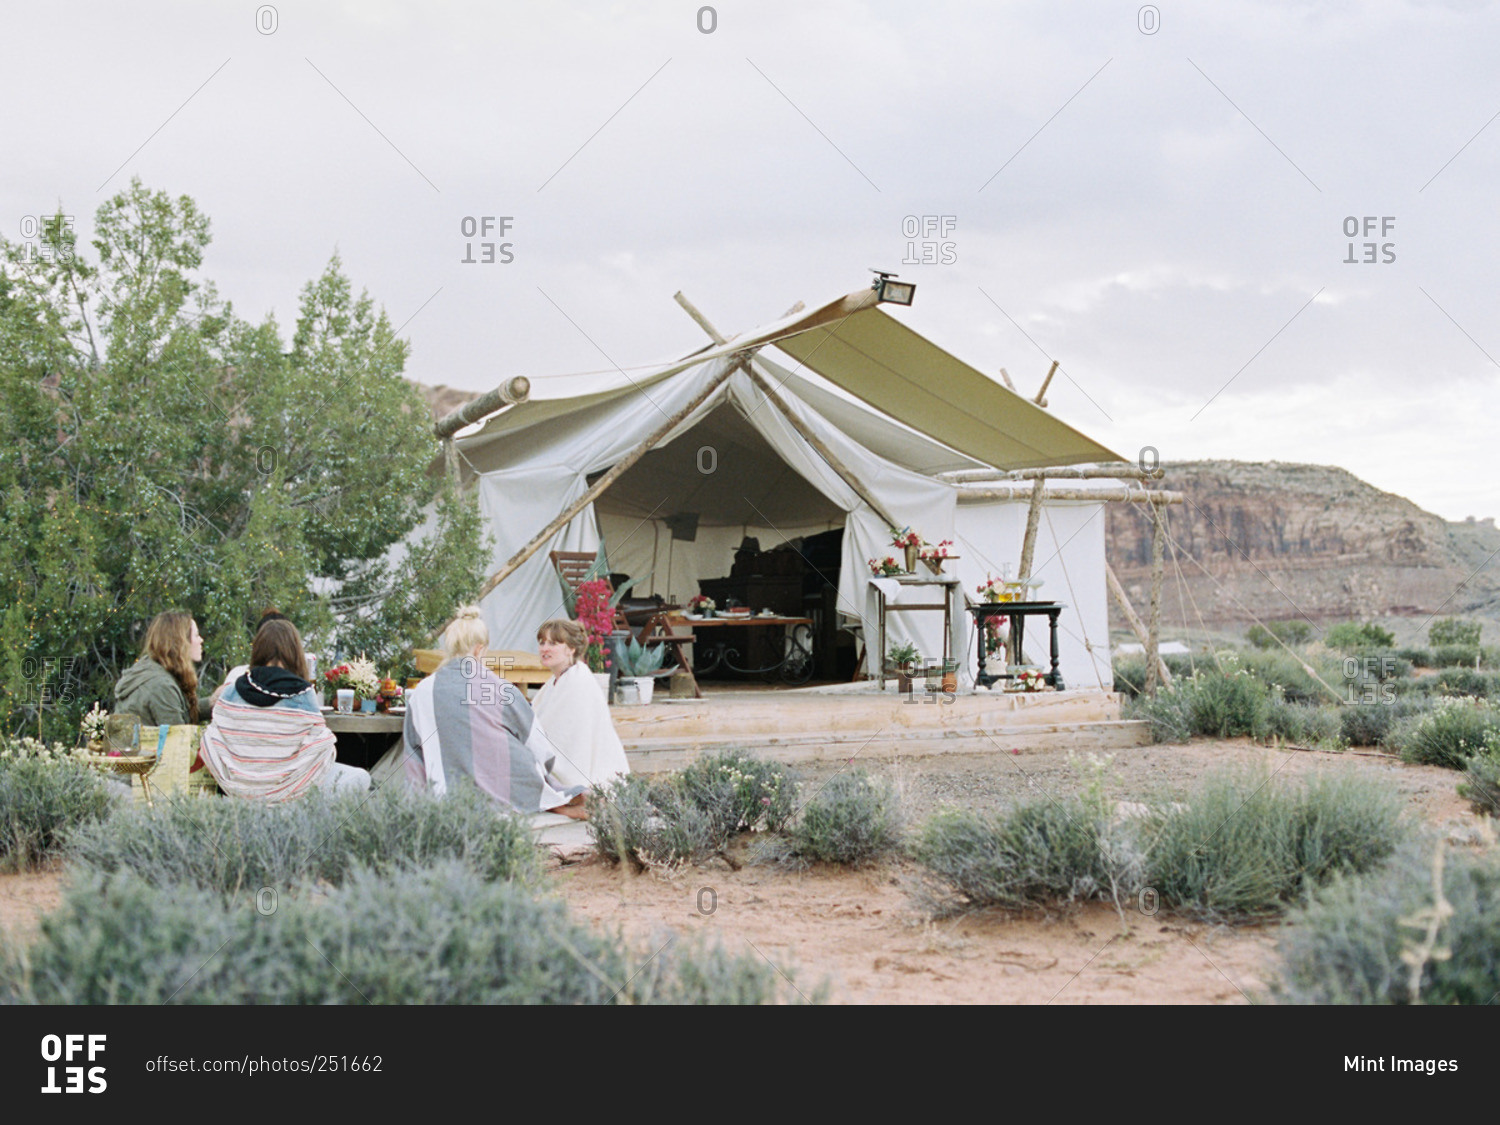 Group of women enjoying an outdoor meal in a desert by a large tent